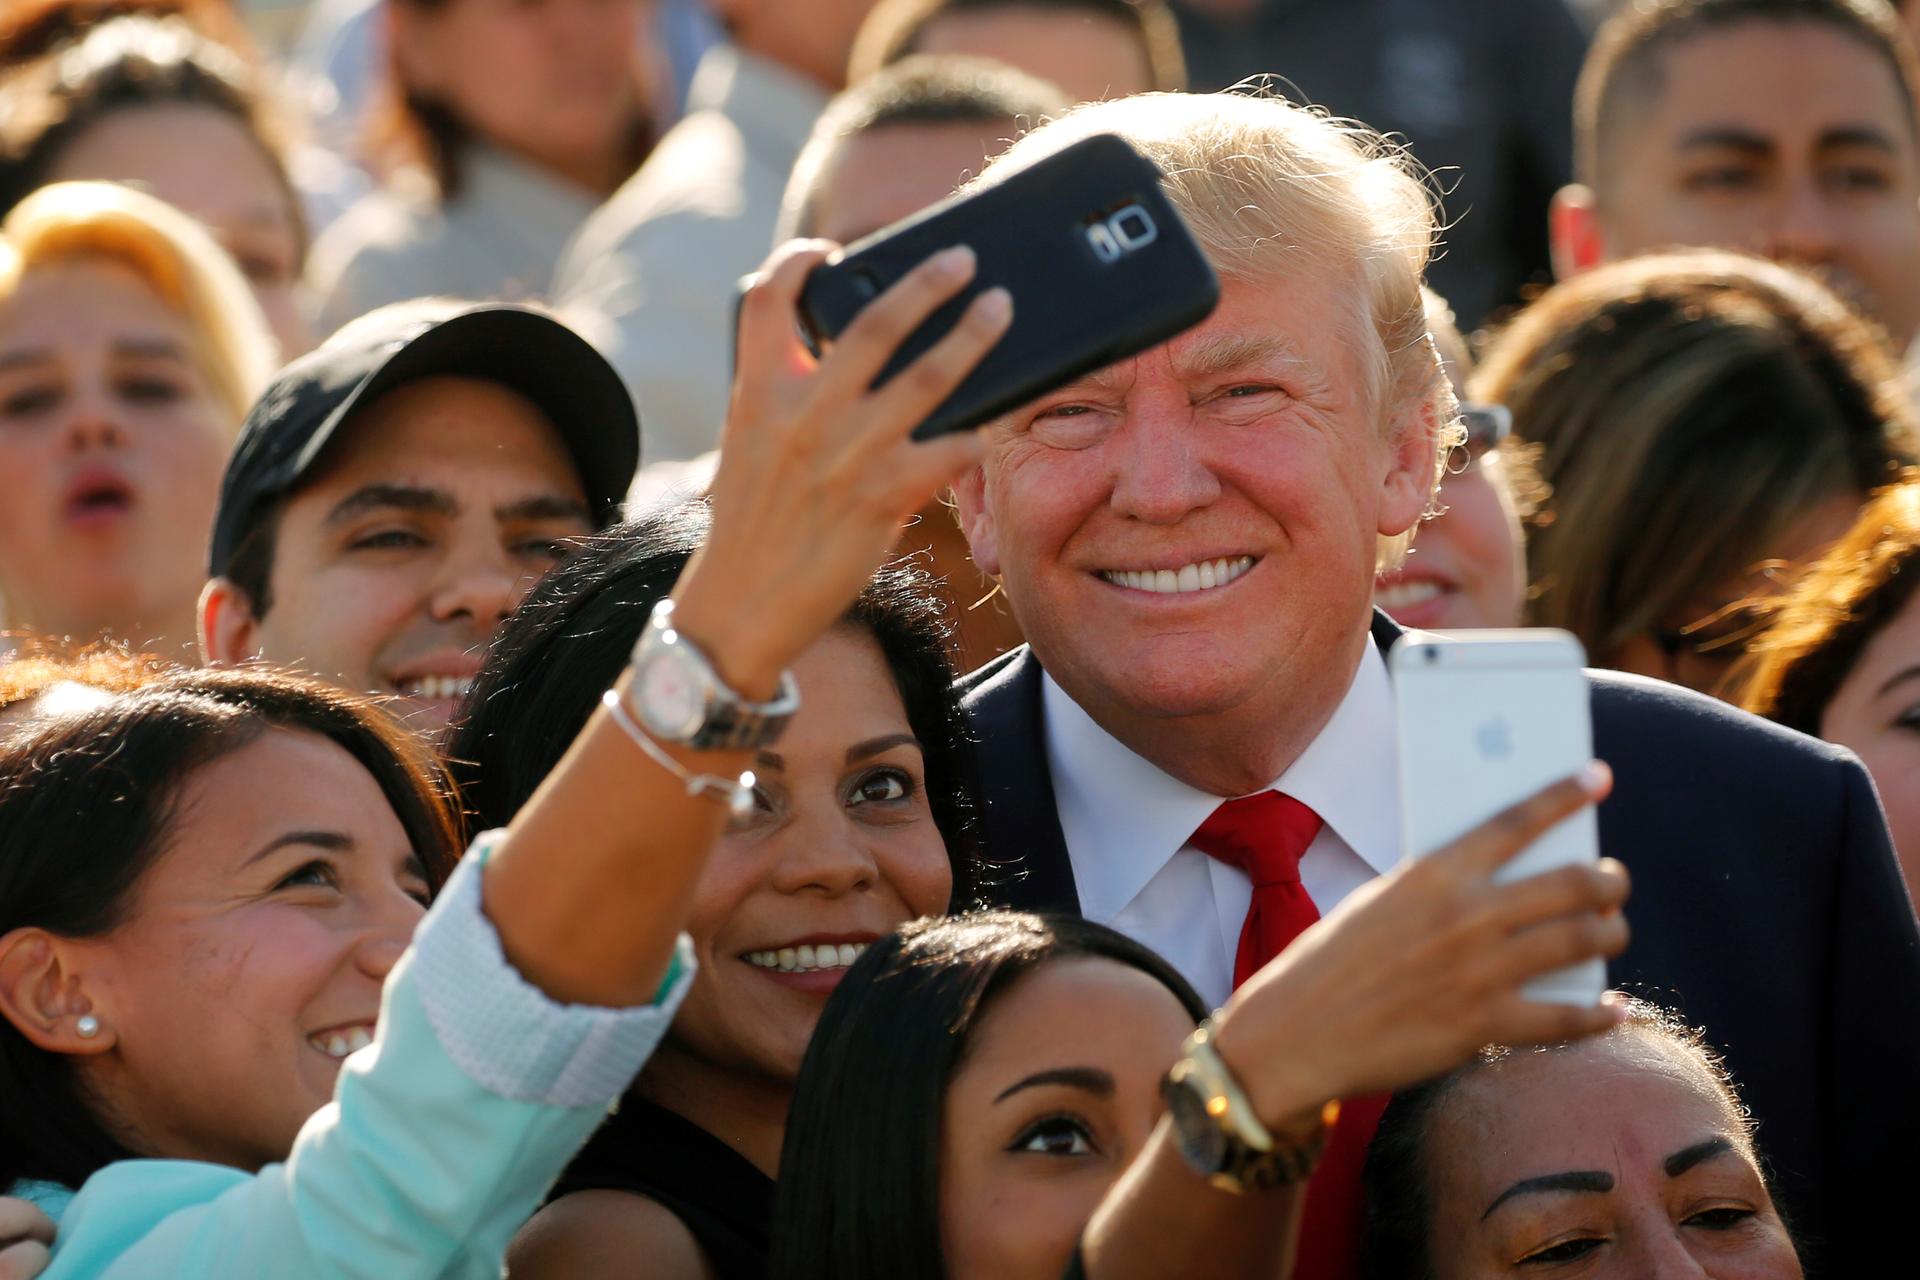 Trump poses for selfies in Miami, Florida, on October 25, 2016. 